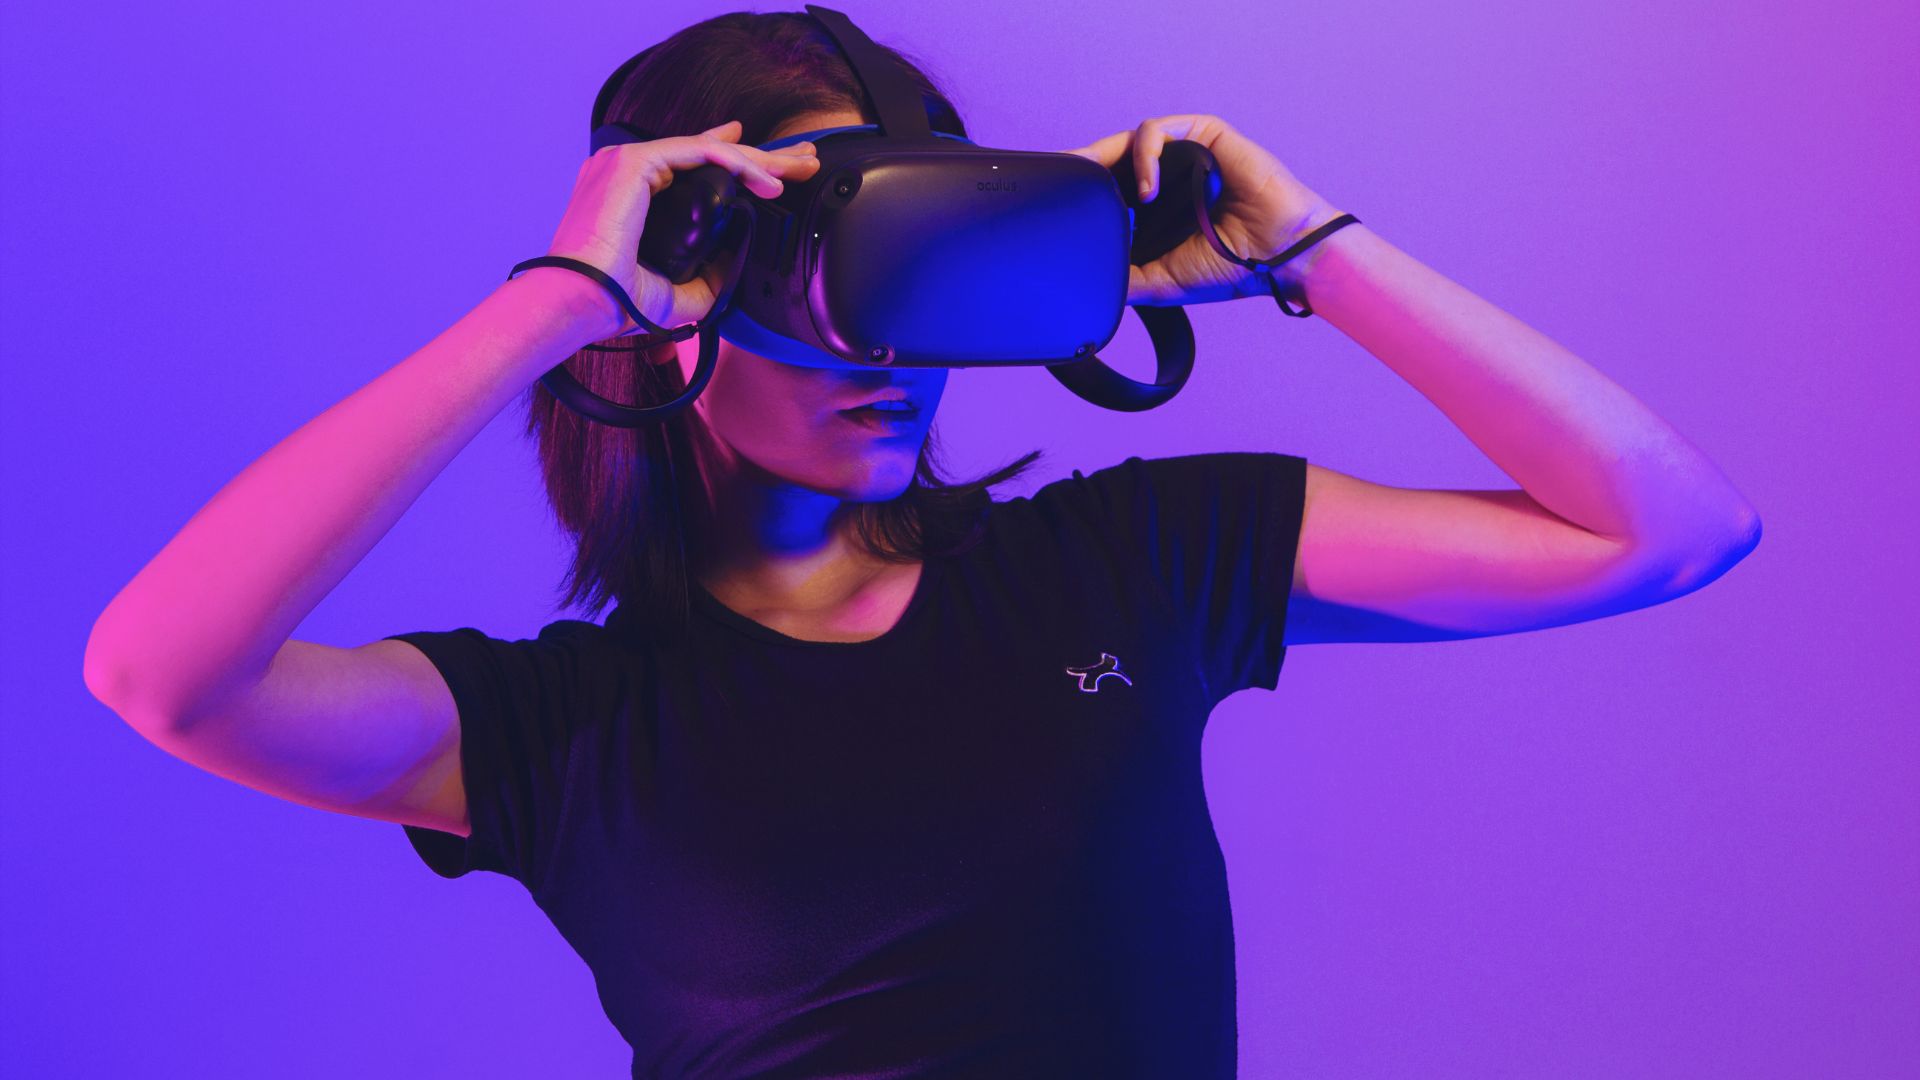 A woman adjusting her VR headset